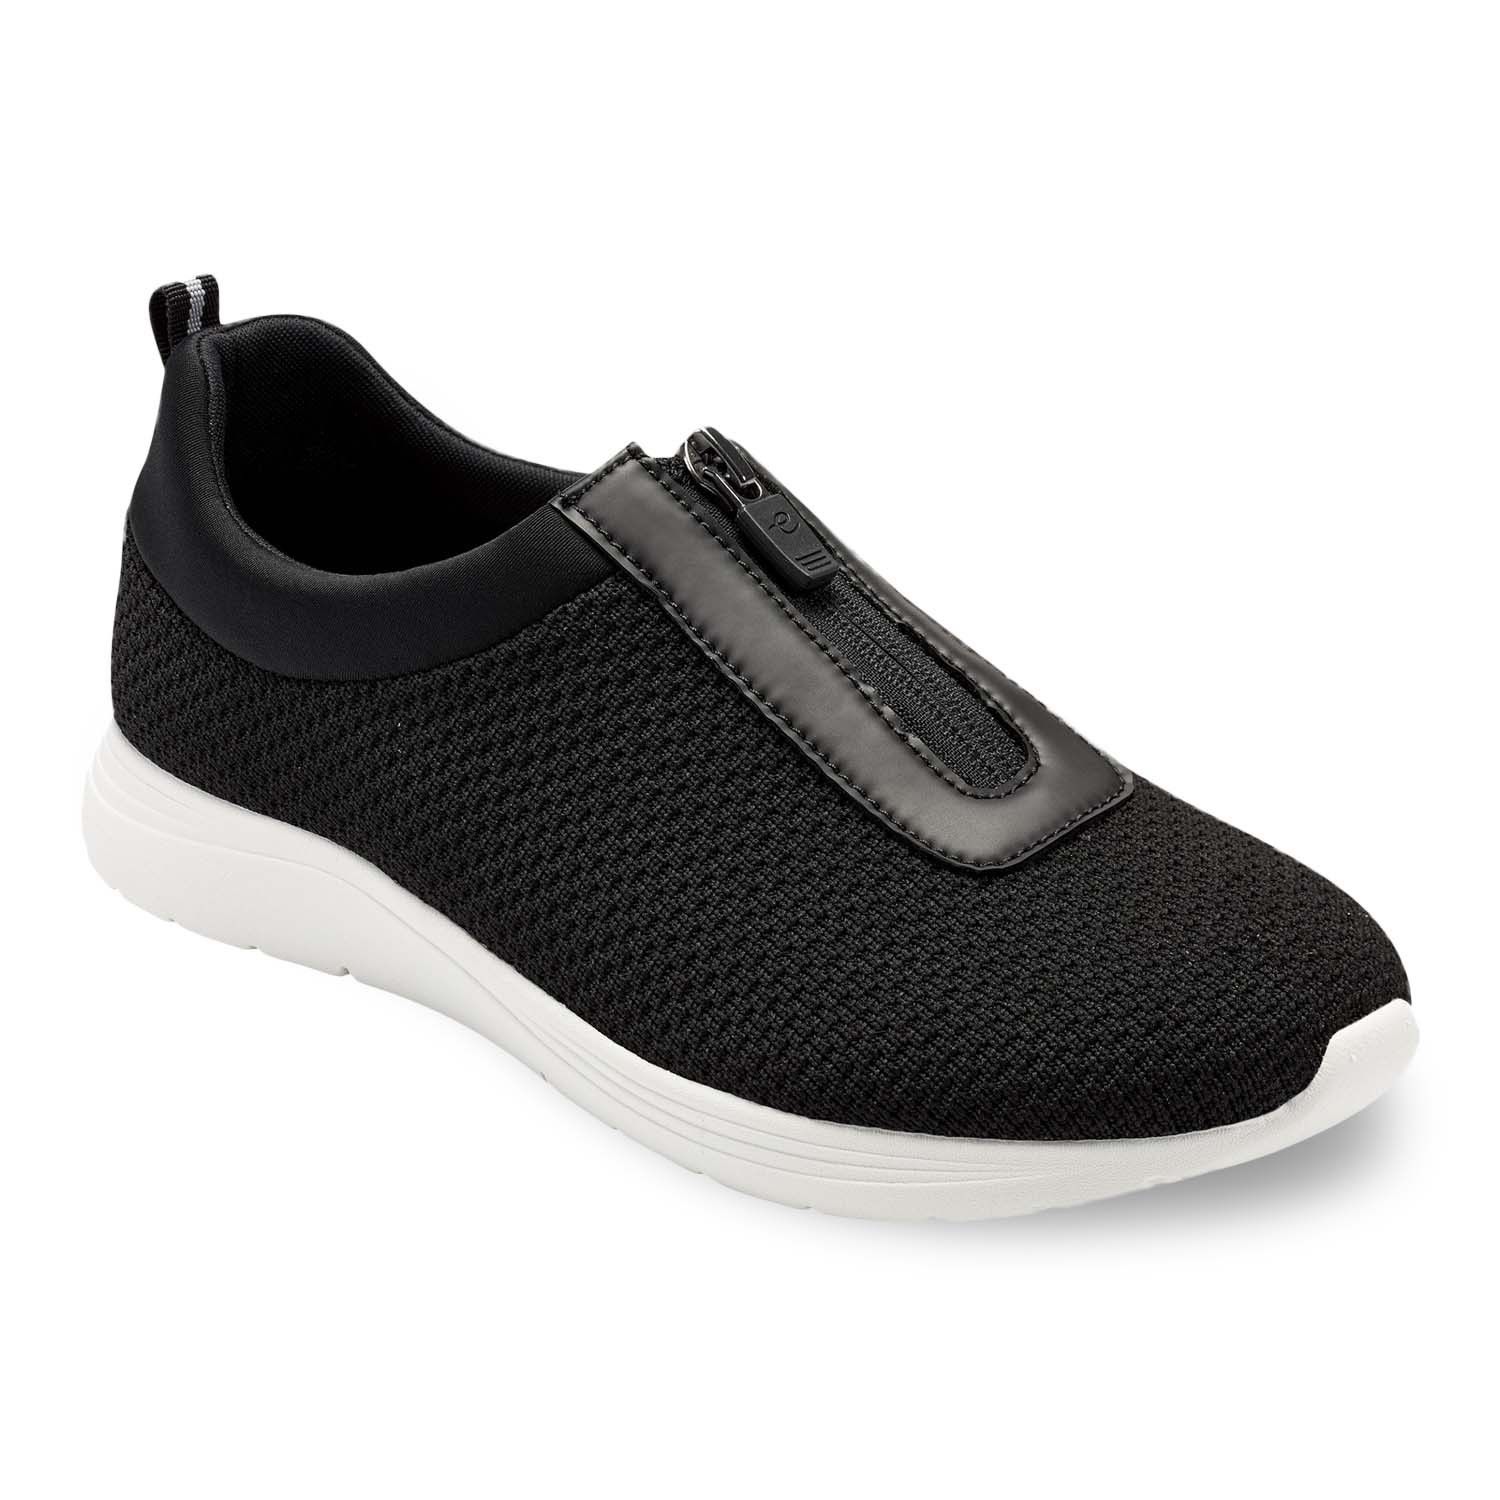 Image for Easy Spirit Laine Women's Center Zip Athleisure Shoes at Kohl's.